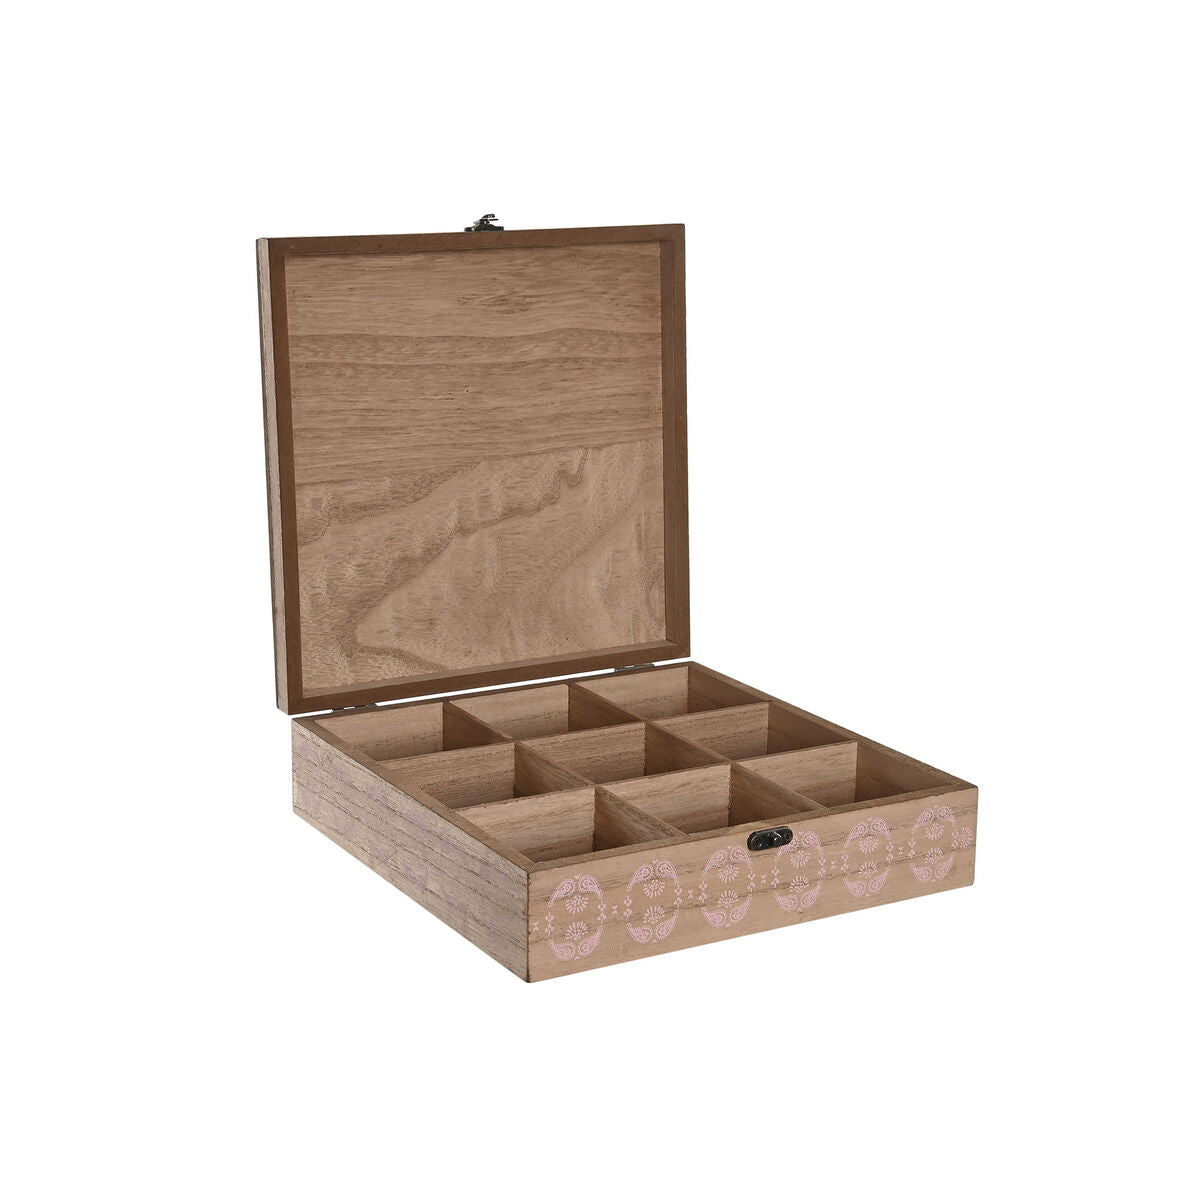 Box for Infusions DKD Home Decor Kristal Roze Metaal Wit 24 x 24 x 7 cm 3 Onderdelen Hout MDF